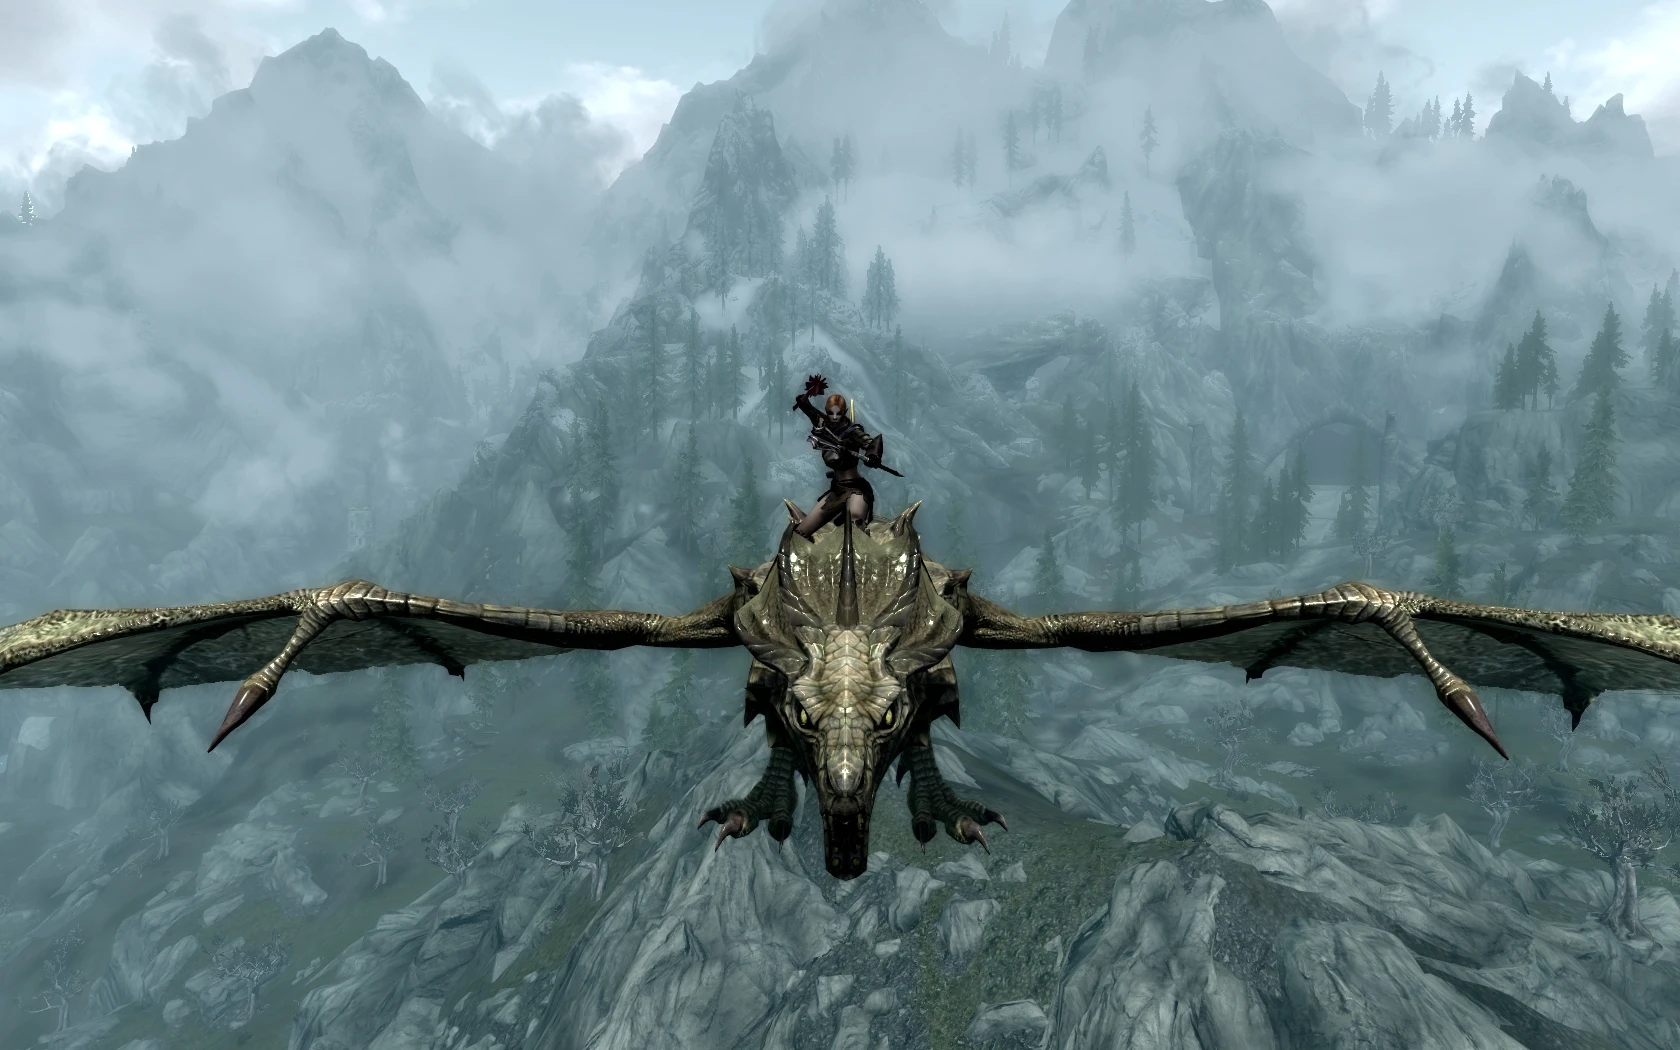 How To Ride A Dragon In Skyrim